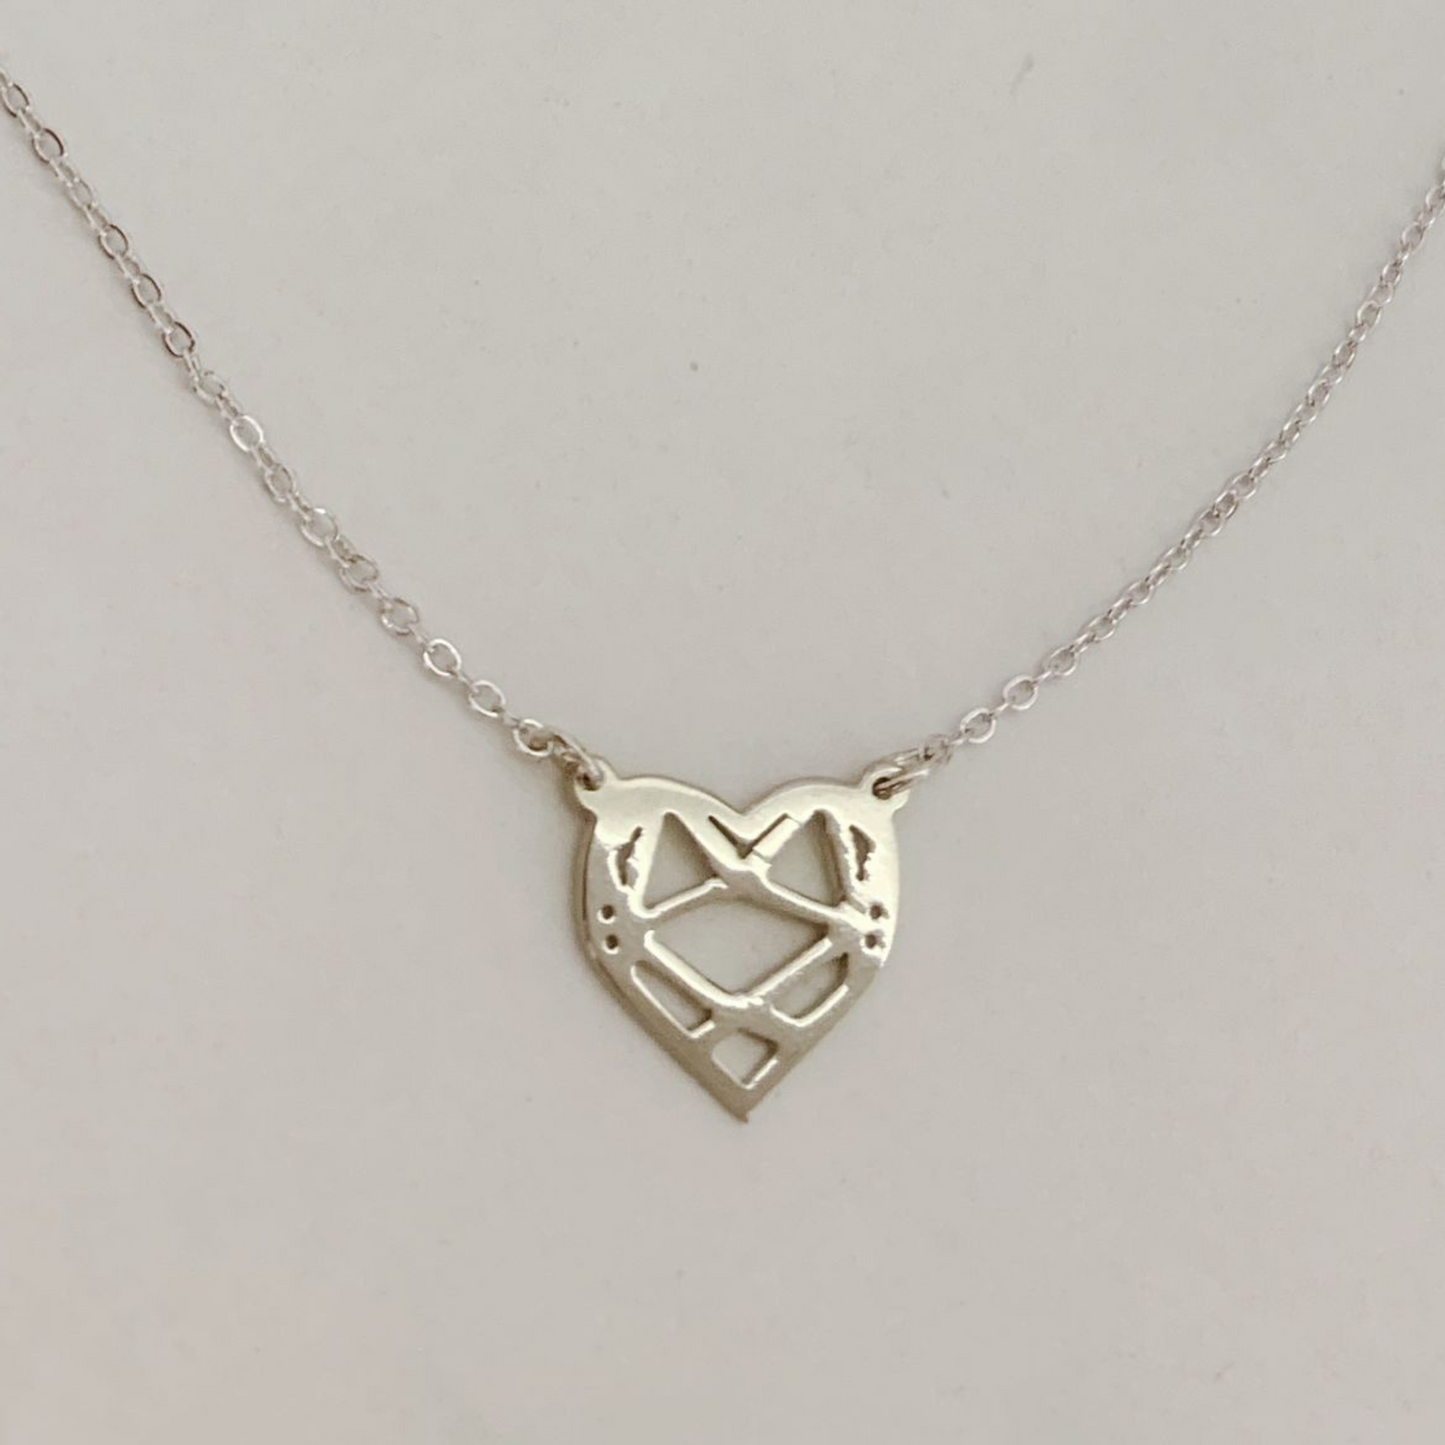 Origami Heart Necklace